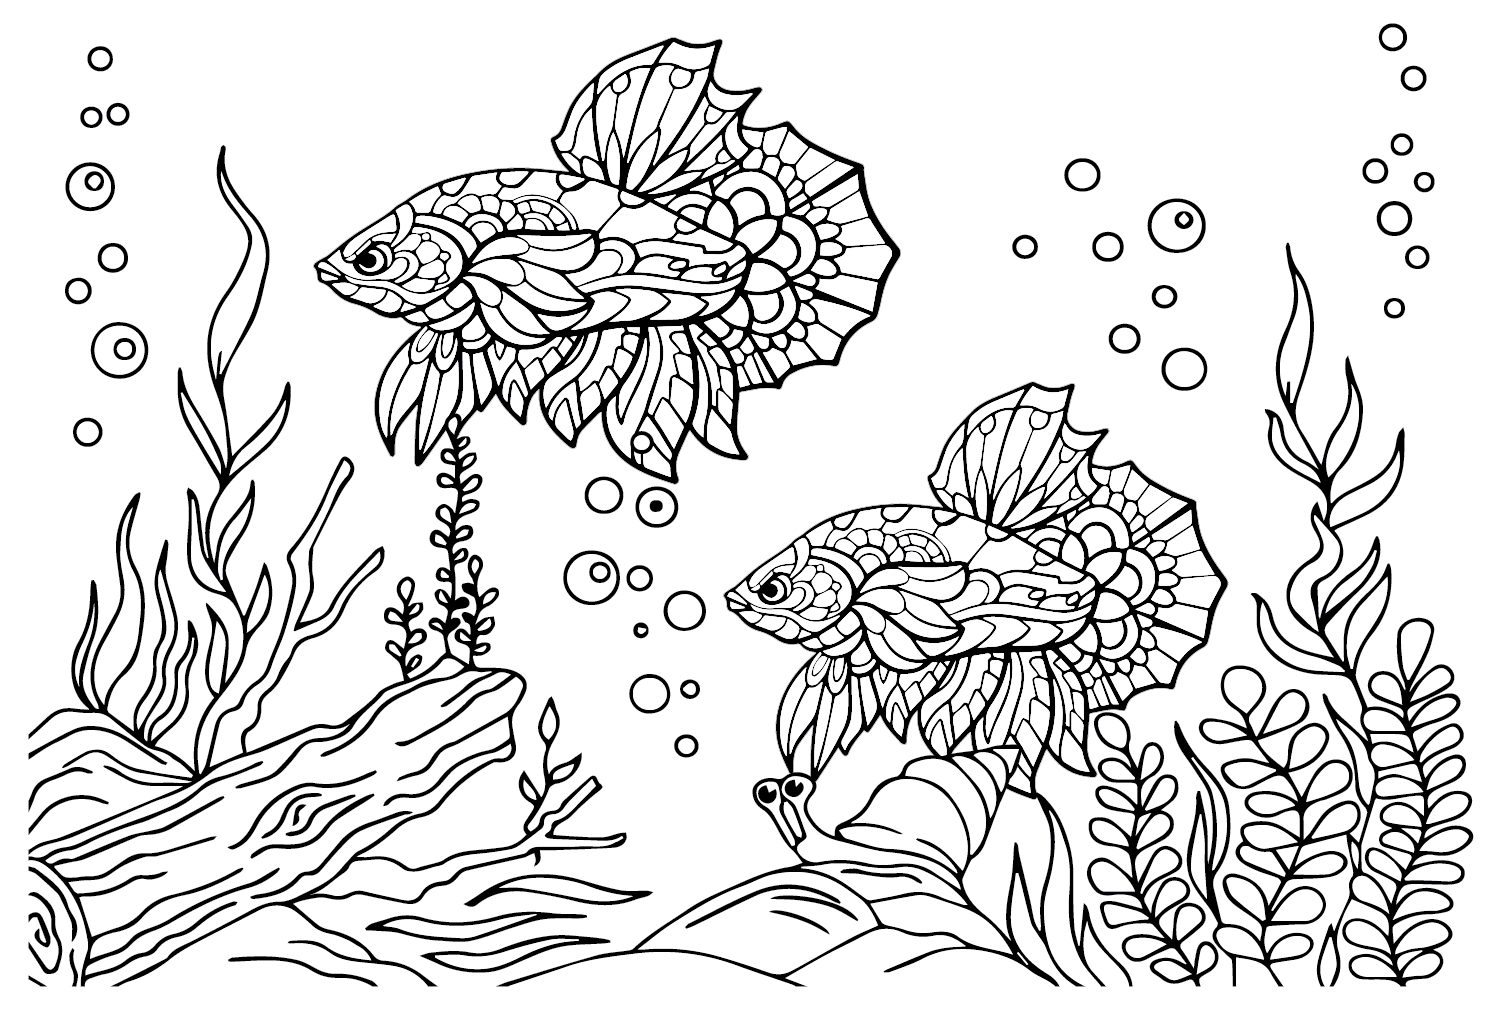 Betta Fish Pictures Coloring Page - Free Printable Coloring Pages